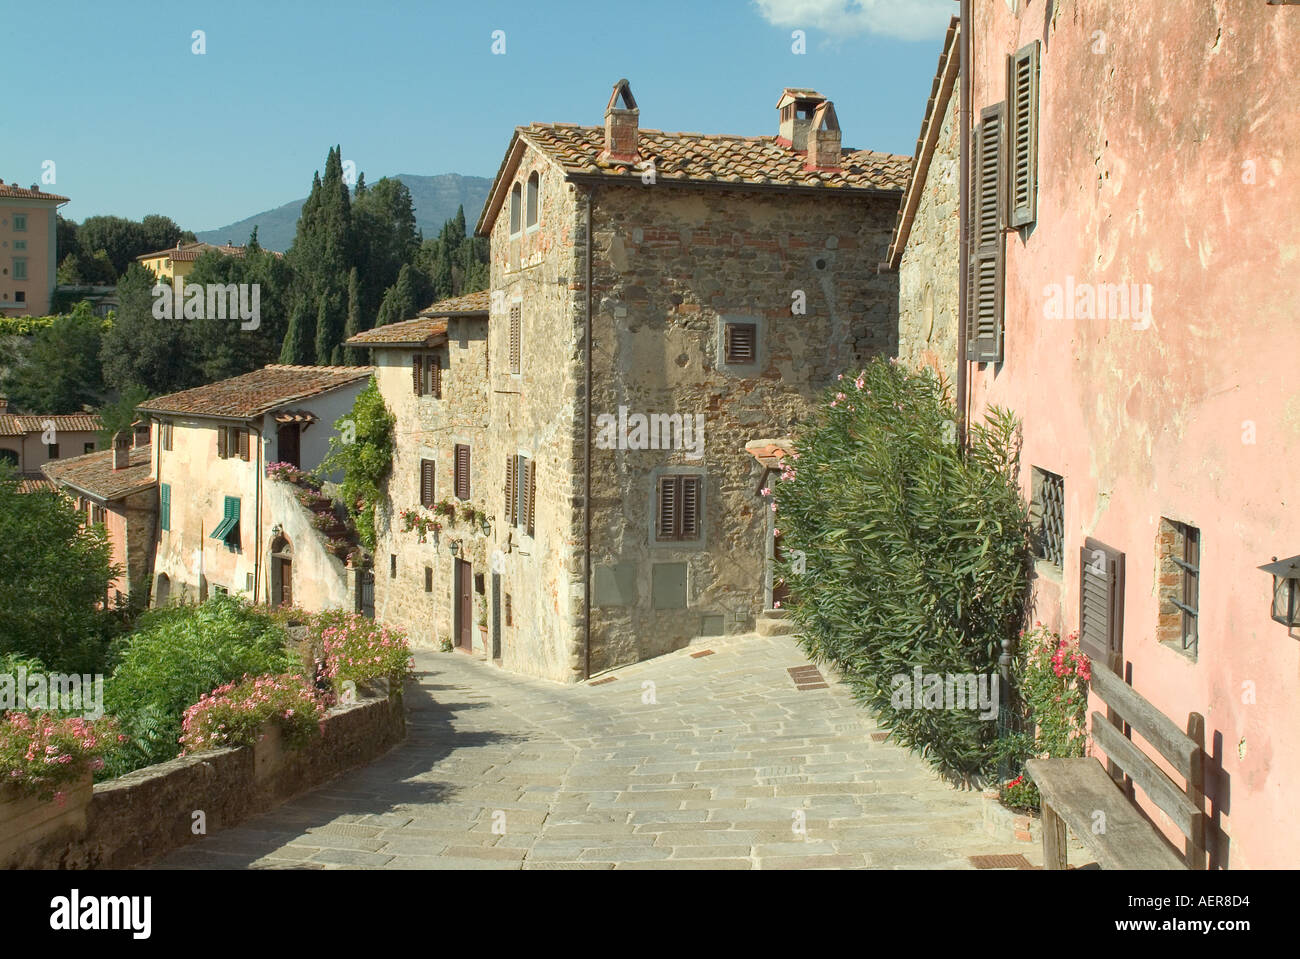 Tuscany Italy The medieval town of il Borro in Tuscany Italy with a view of the Pratomagno mountains Stock Photo